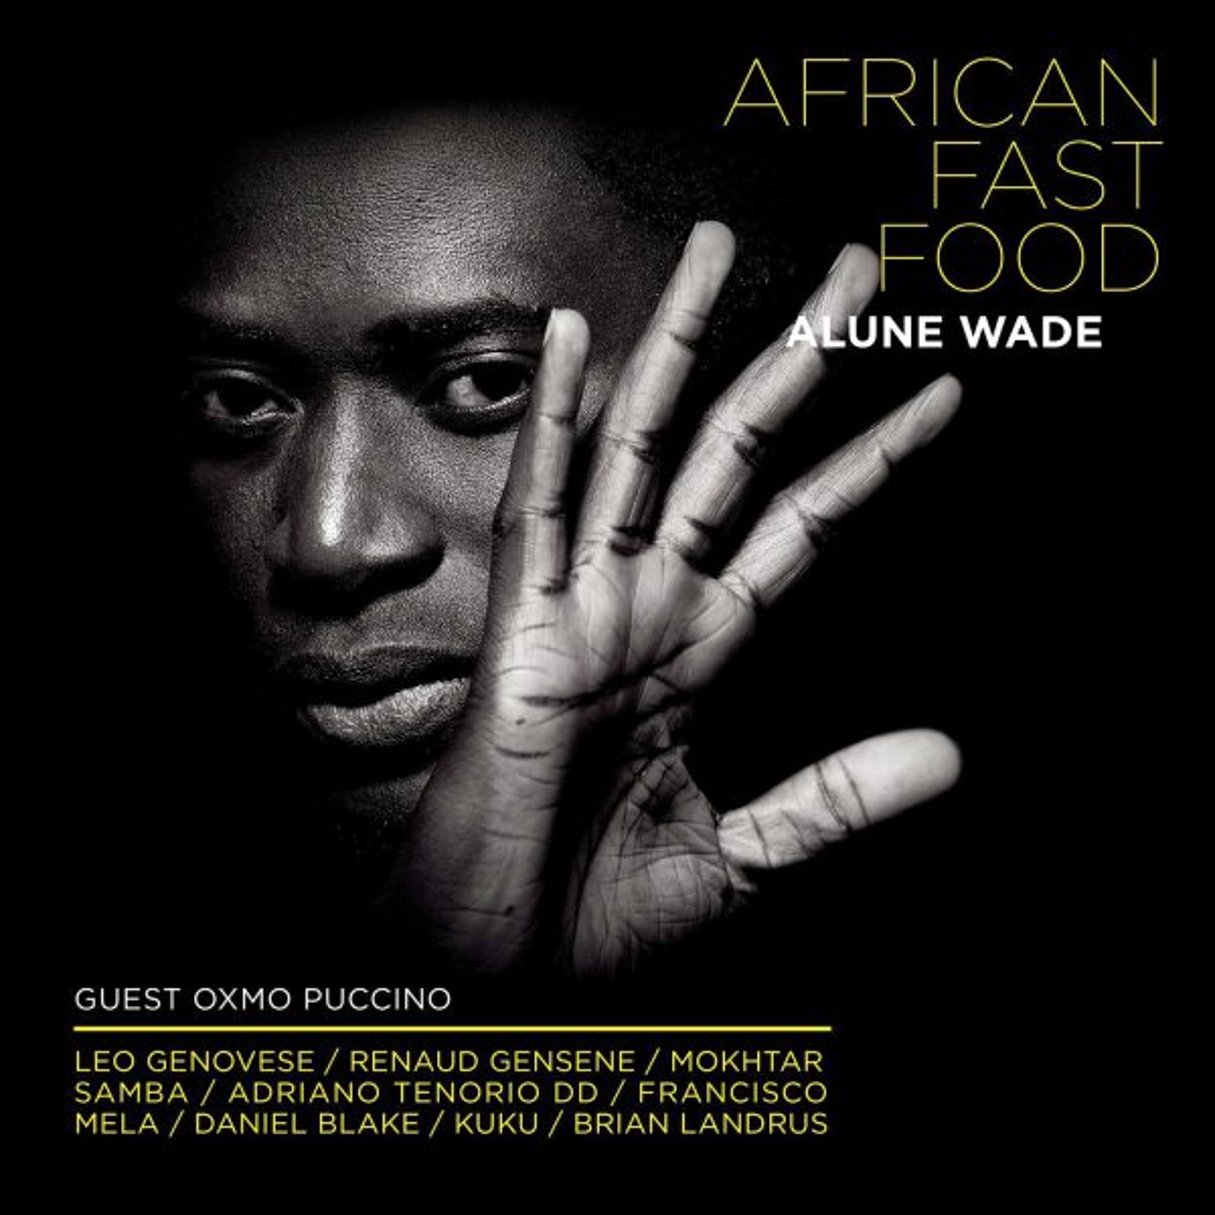 African Fast Food, d’Alune Wade, label 10H10